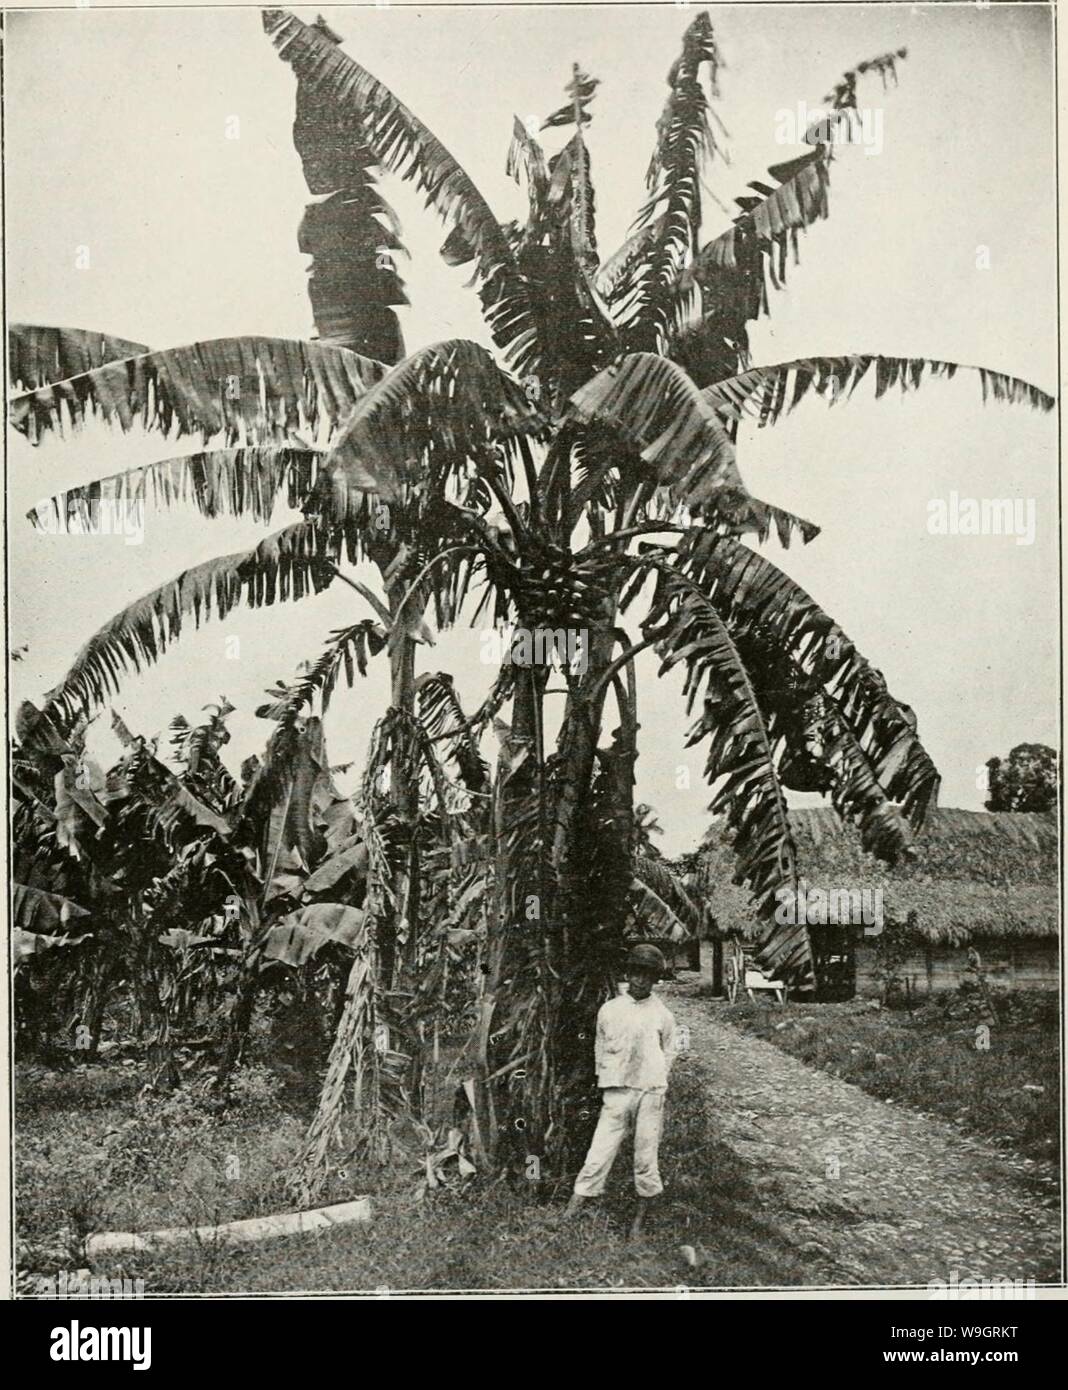 Archive image from page 332 of The Cuba review (1907-1931). The Cuba review  cubareview16muns Year: 1907-1931 ( THE CUBA REVIEW 13 BANANA AND YUCCA BREAD FOR THE TROPICS A special bread which the United Fruit Company is making at the ])re.sent time in its trojji- cal divisions represents a saving of api)ro.imately thirty per cent (30) in the use of wheat flour. The company's object in using this bread in its tropical divisions is to save wheat flour. The advantage to the consumer, aside from the matter of patiiotLsm, lies in the fact that the quantity of bread for the same money will be somew Stock Photo